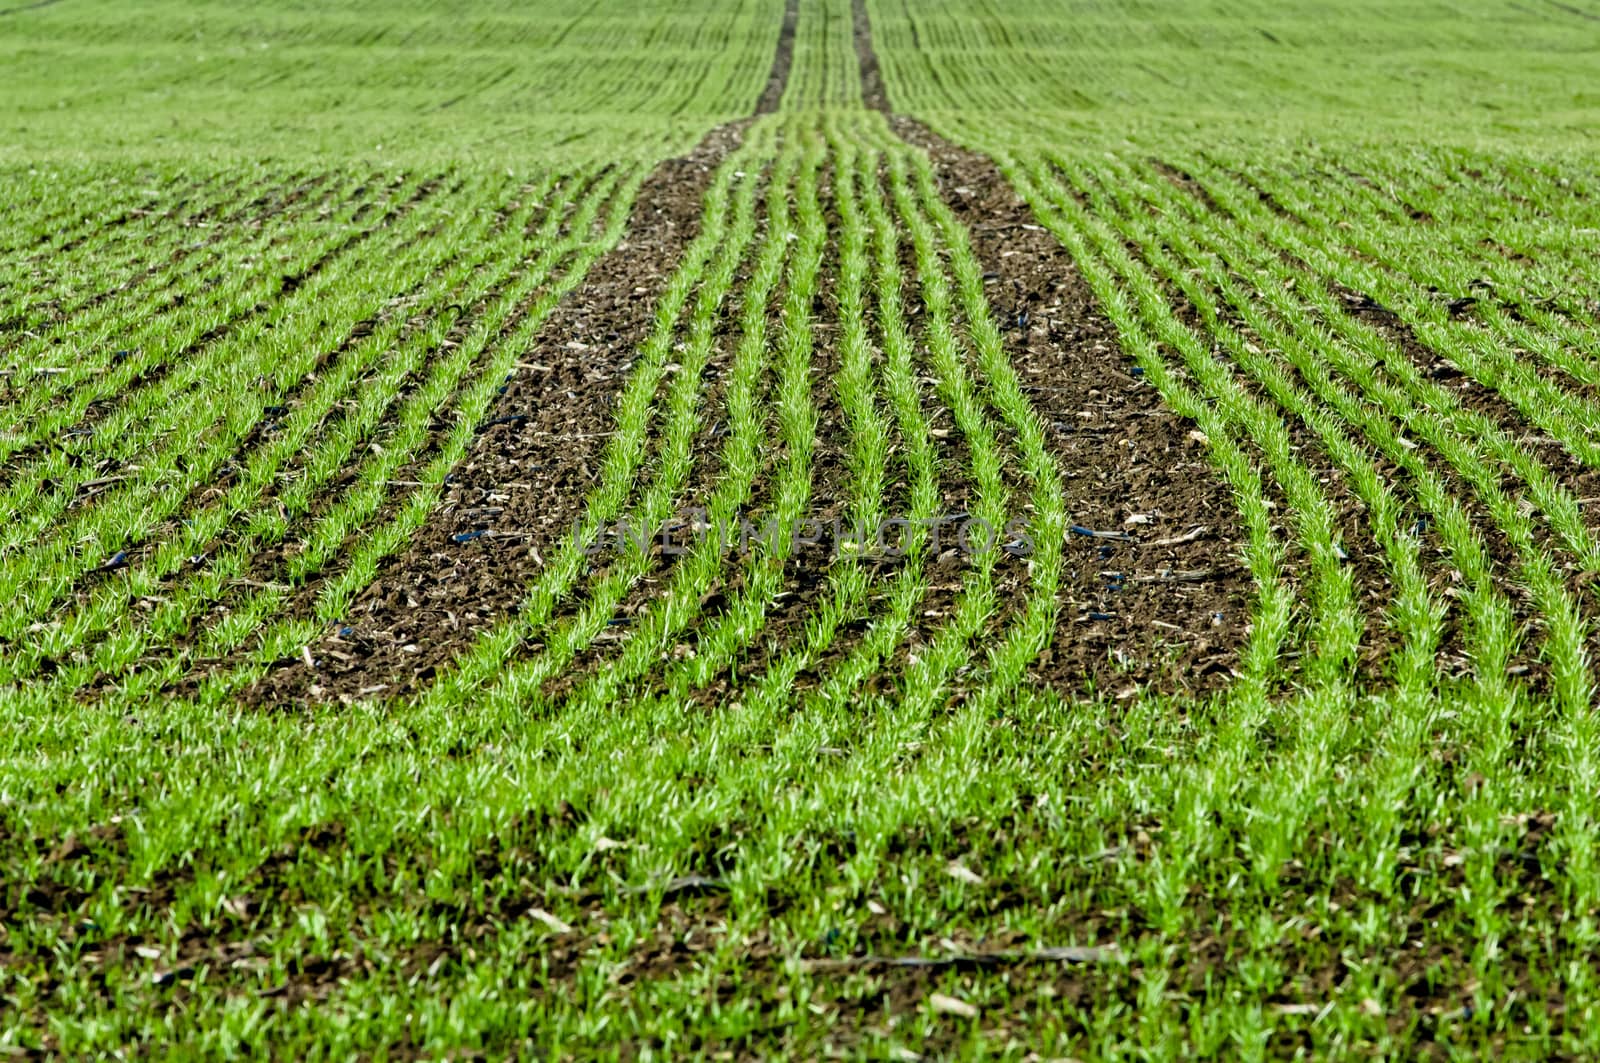 Crop of young seedlings in an agricultural field in springtime